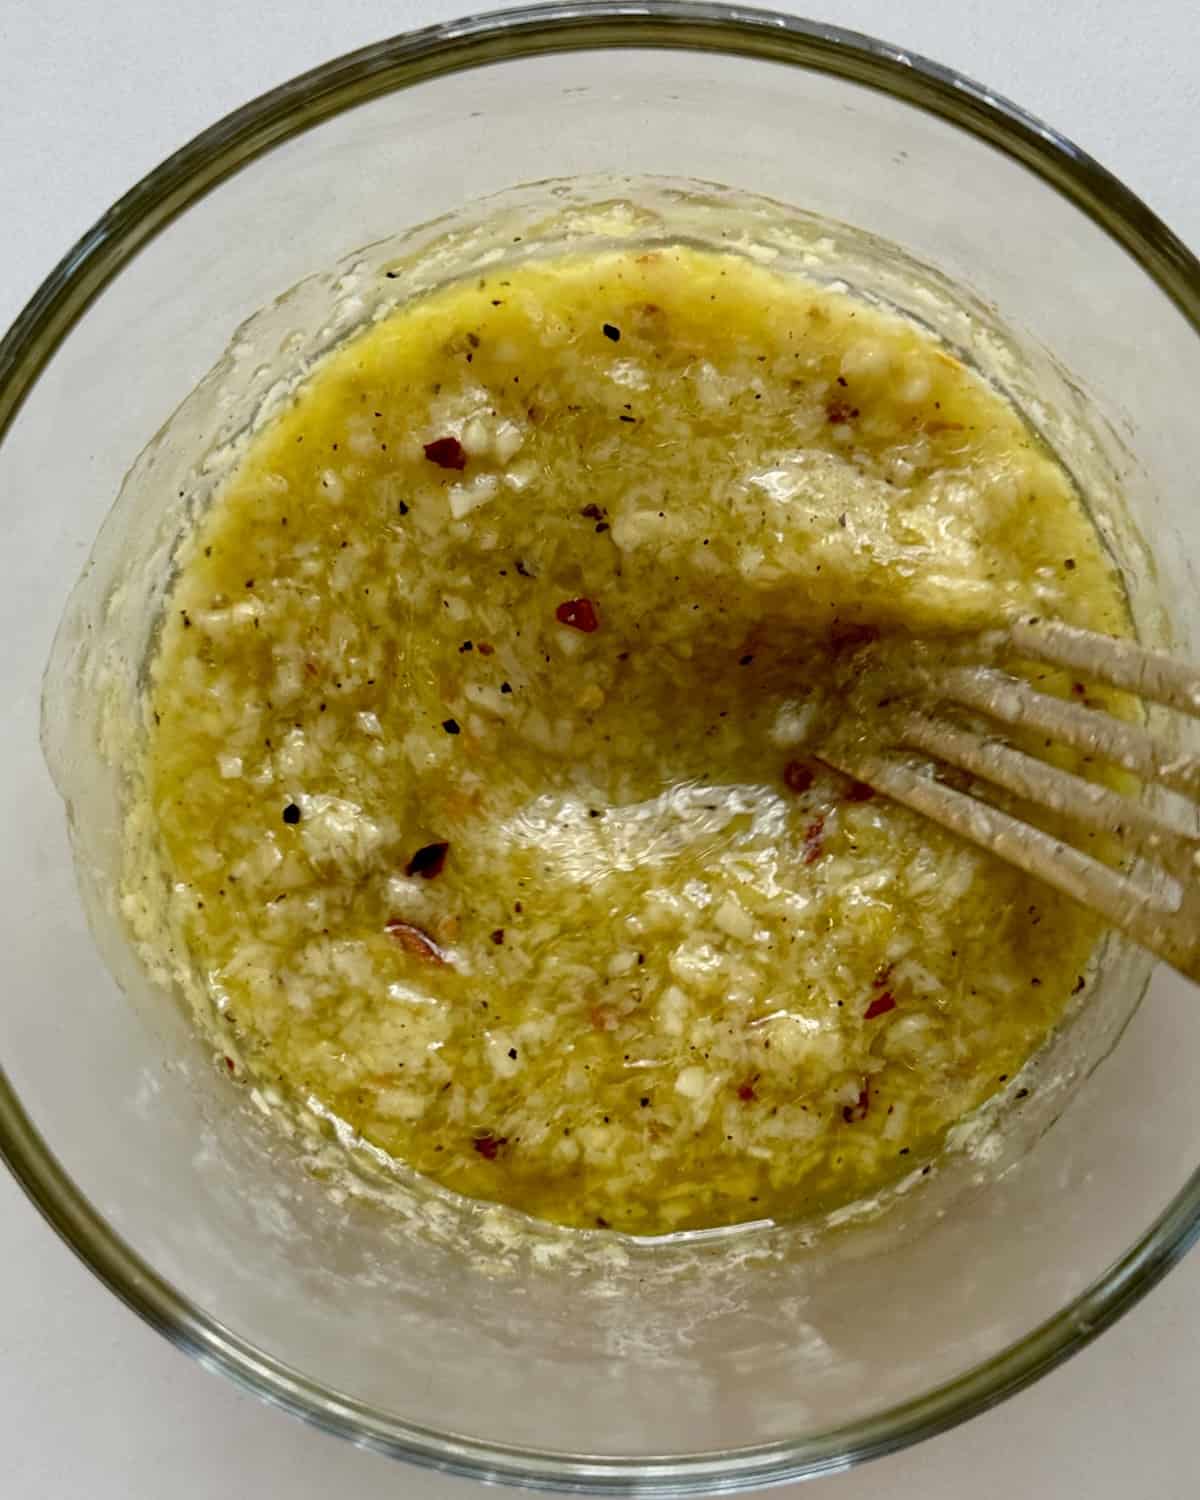 Olive oil, minced garlic, red pepper flakes, lemon zest and juice and grated parmesan mixed together in a clear bowl.